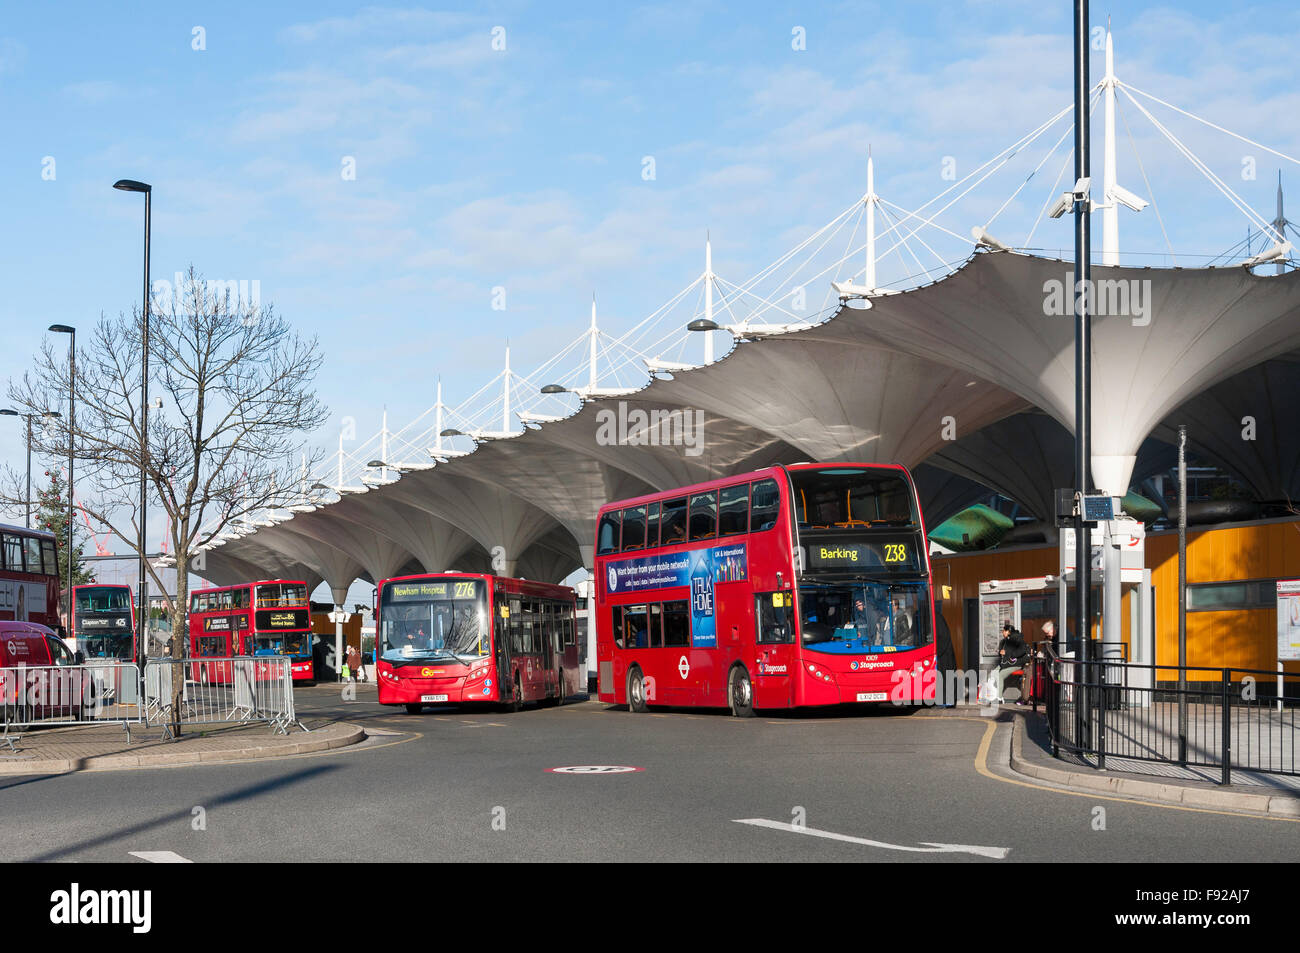 Stratford Bus Station High Resolution Stock Photography and Images - Alamy